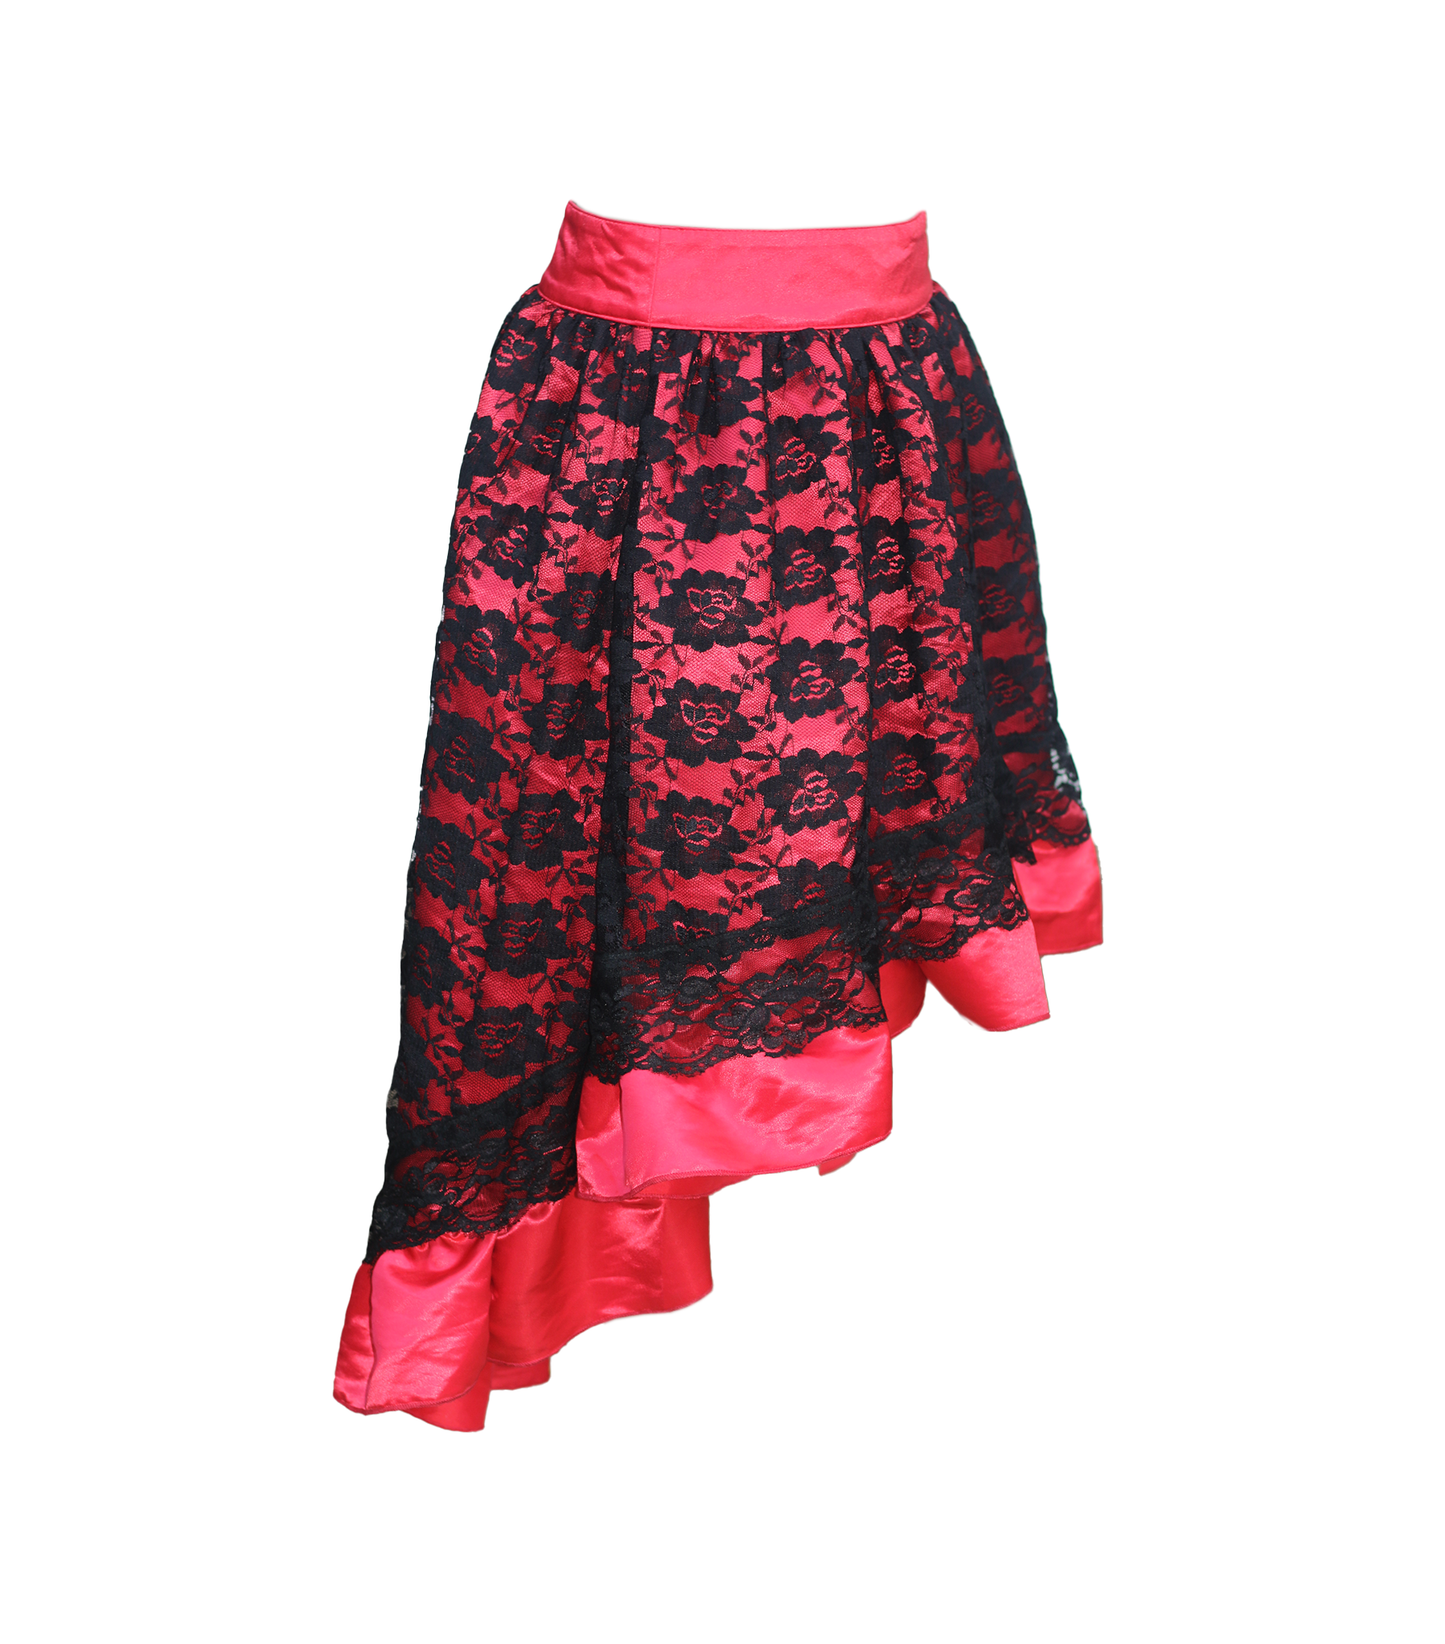 Shadow Veil Lace Overlay Red Satin Skirt